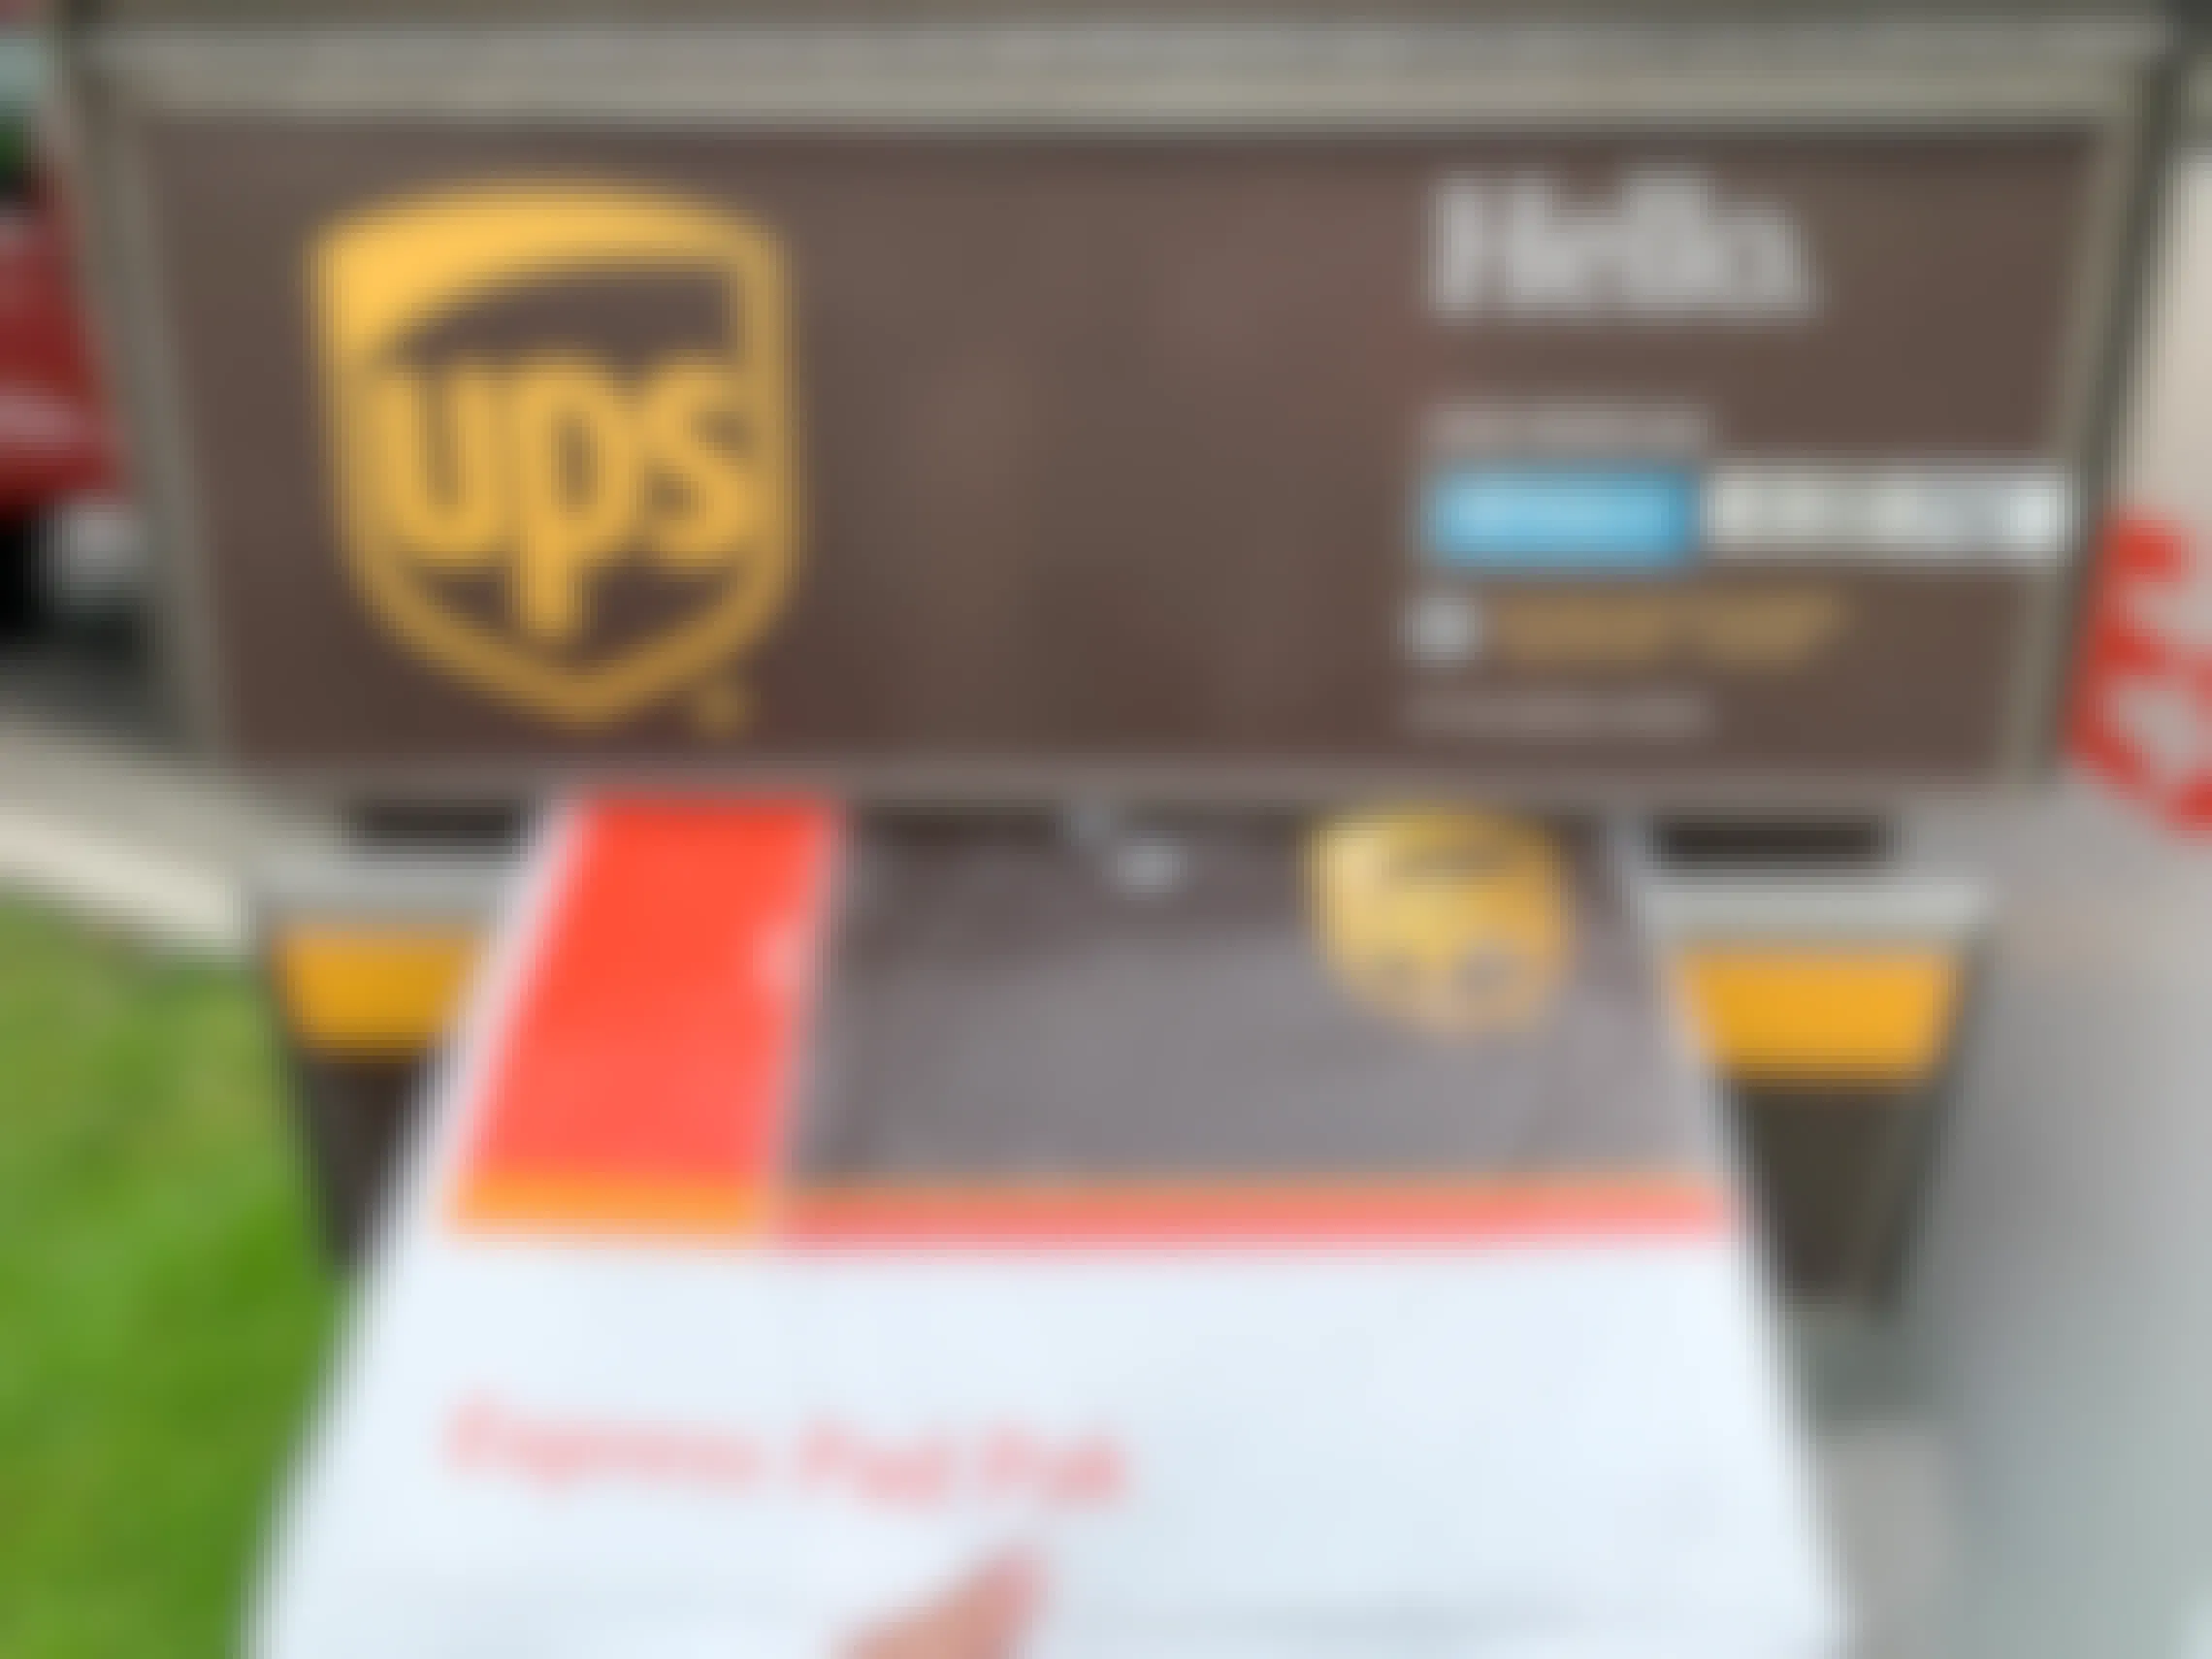 A UPS package being dropped in a UPS mail box.